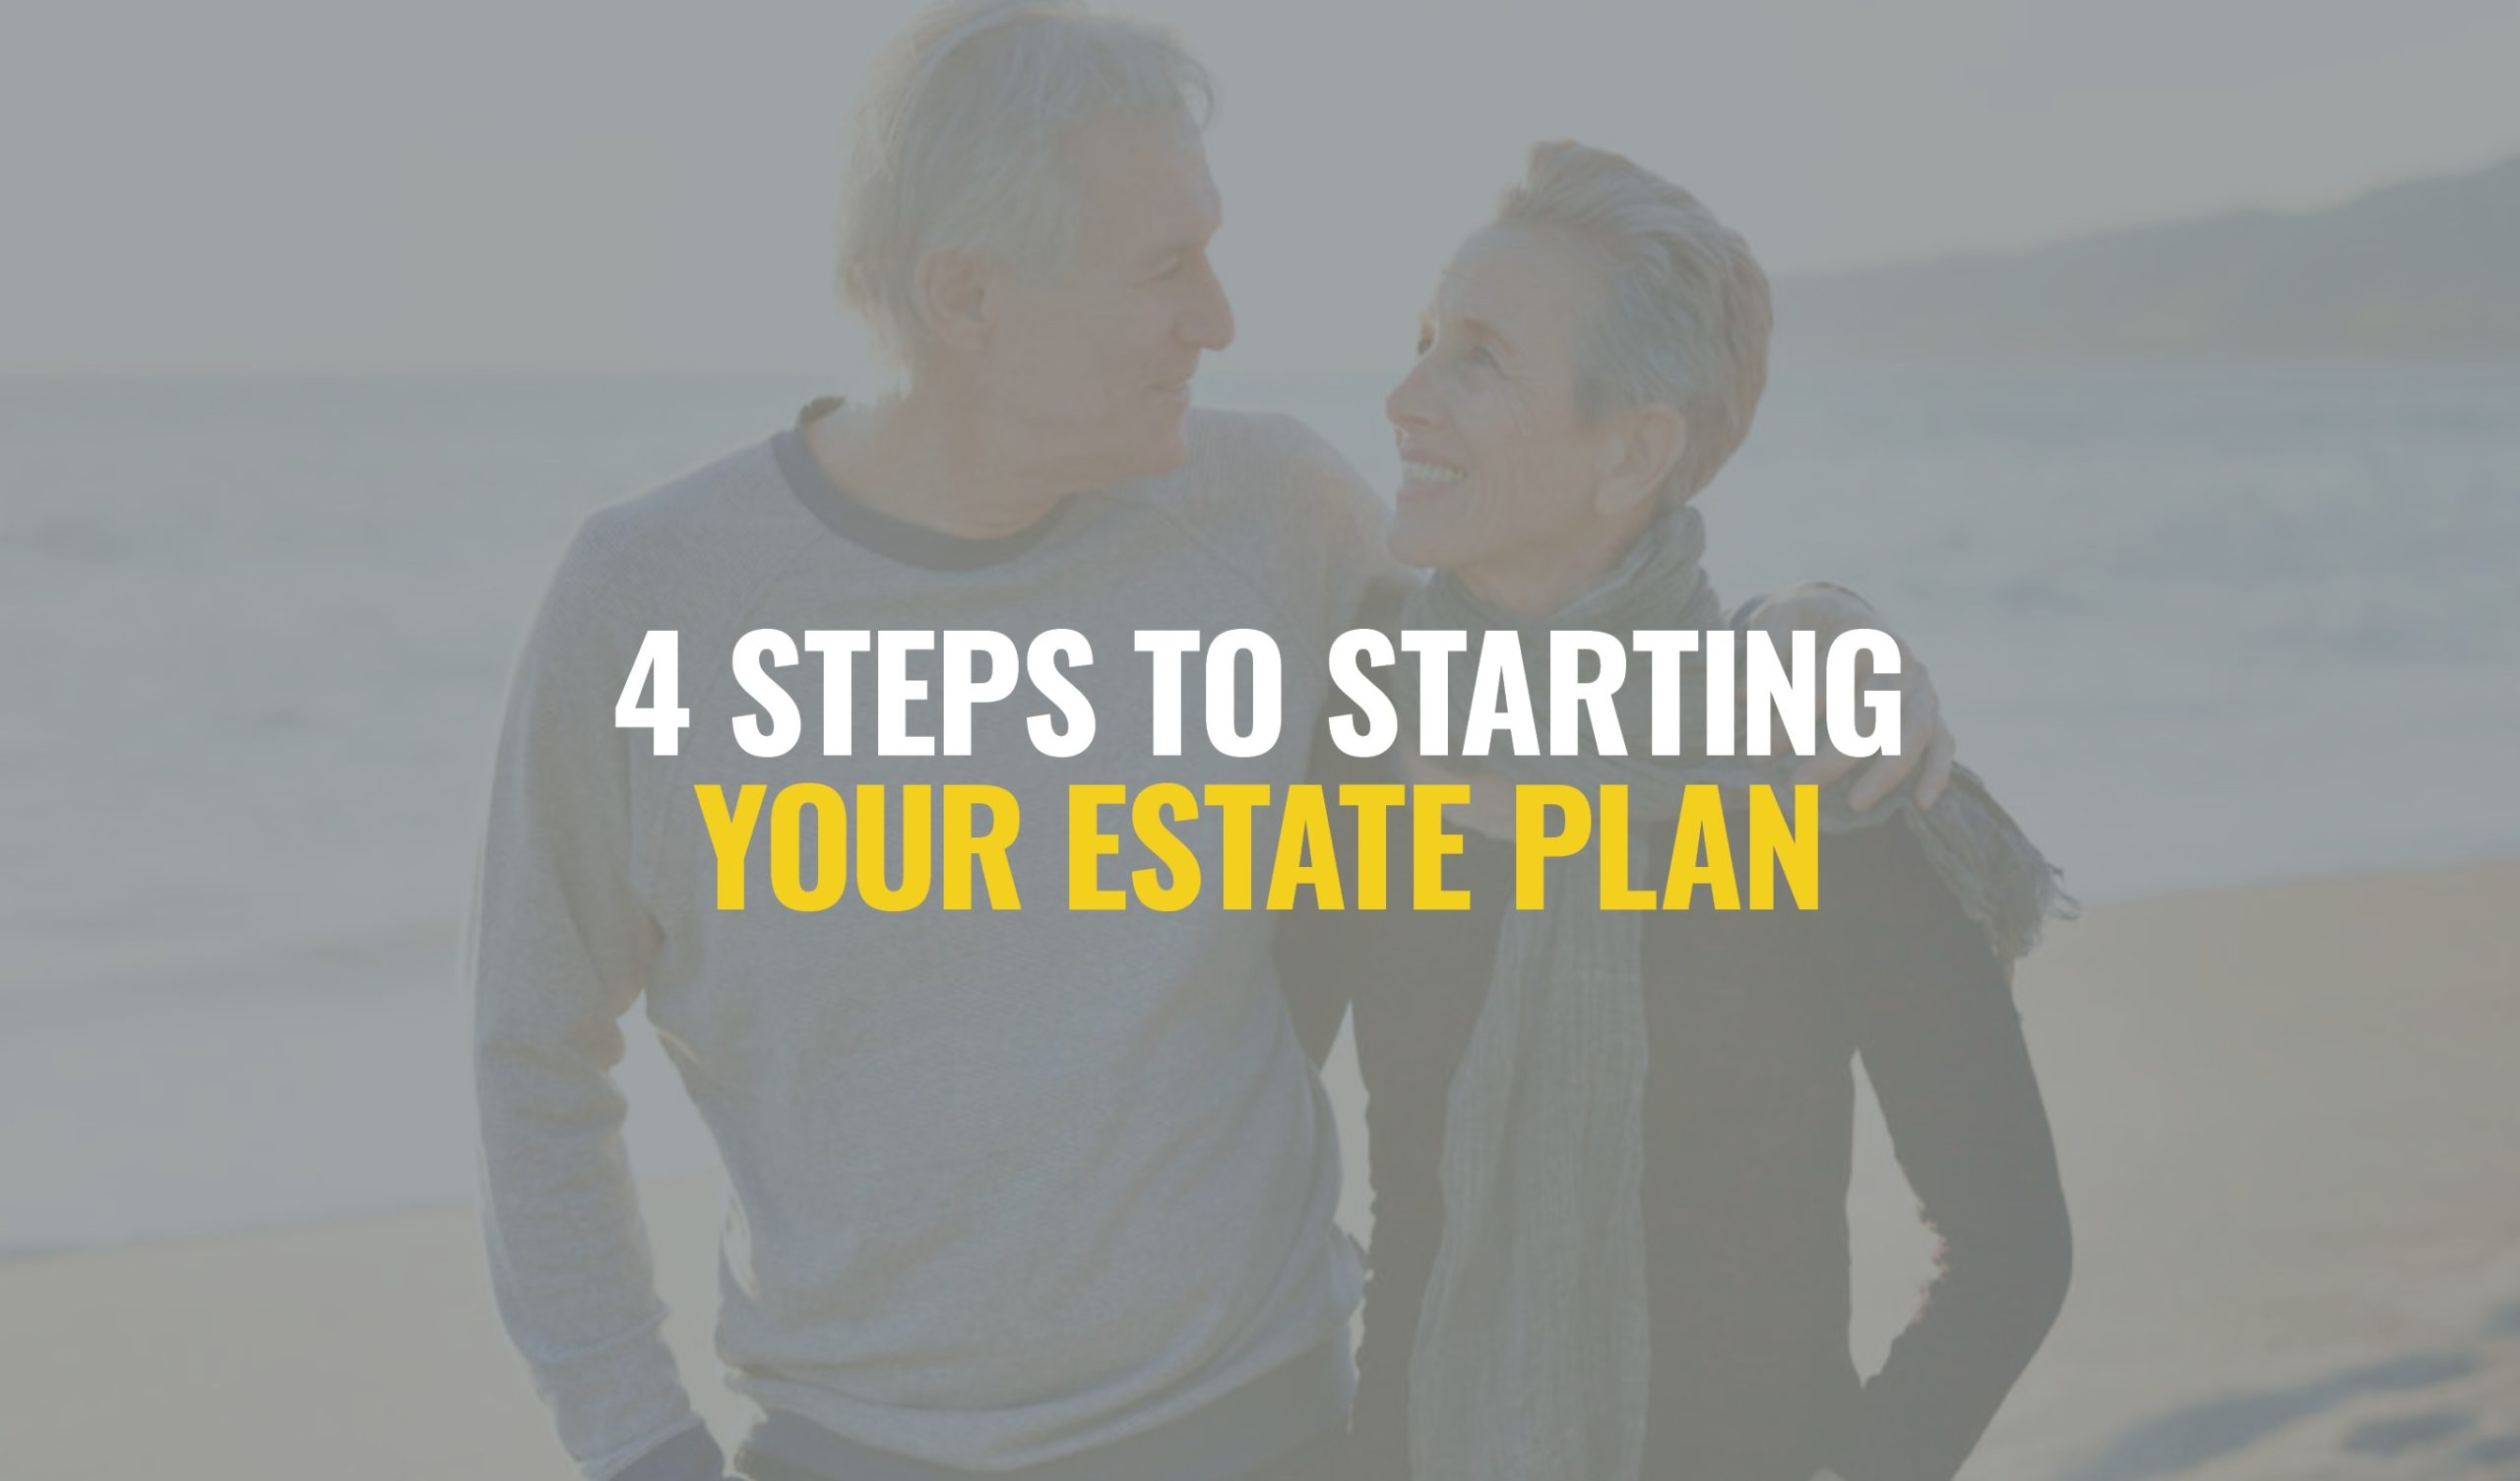 Four Basic Steps to Start Building Your Estate Plan